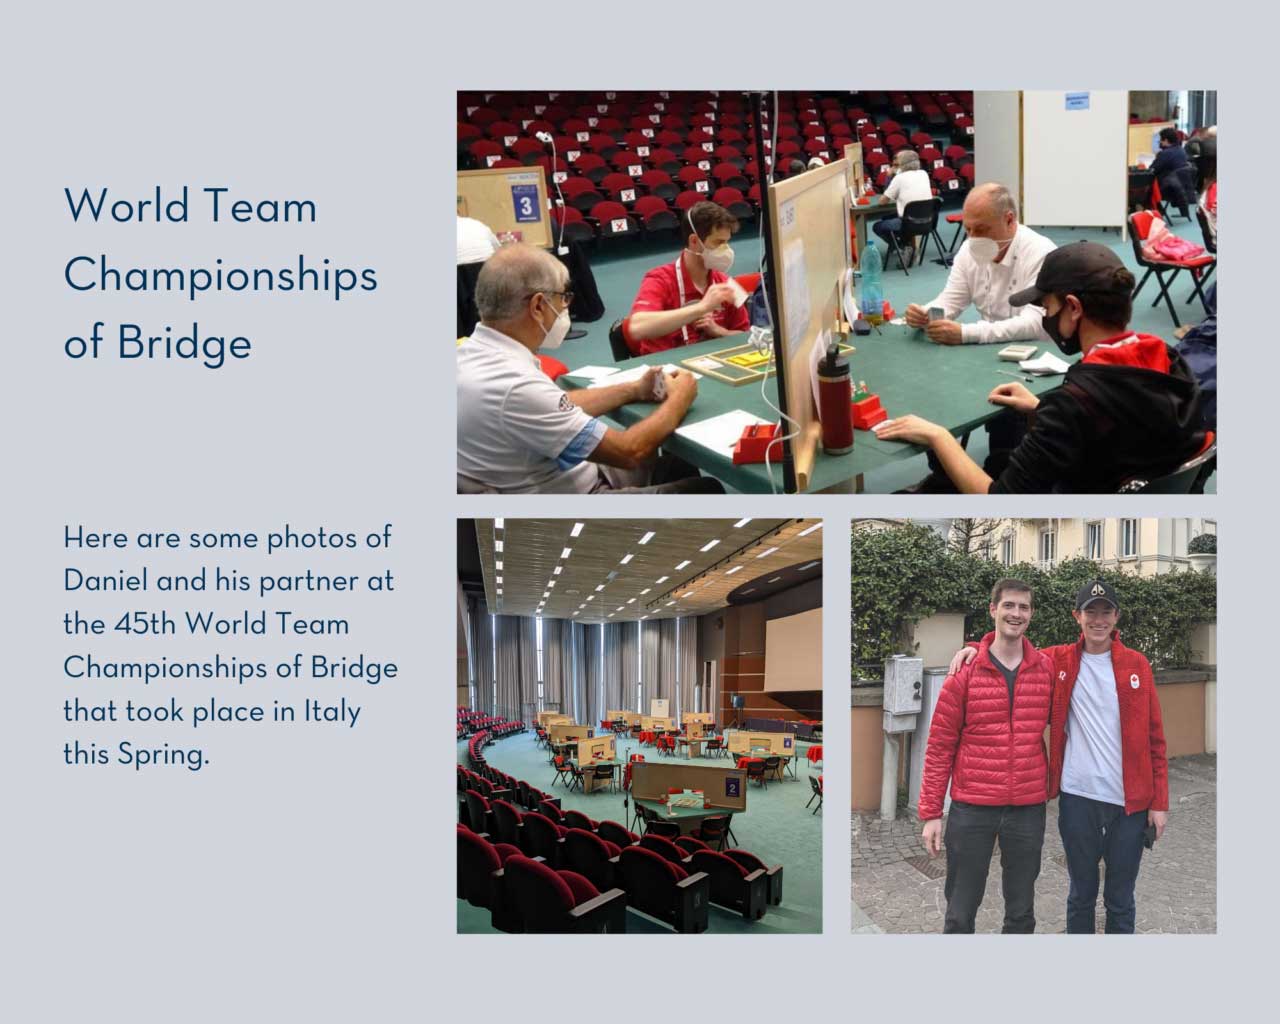 Collage of images of Daniel Lavee at the 45th World Team Championships of Bridge that took place in Italy in 2022.